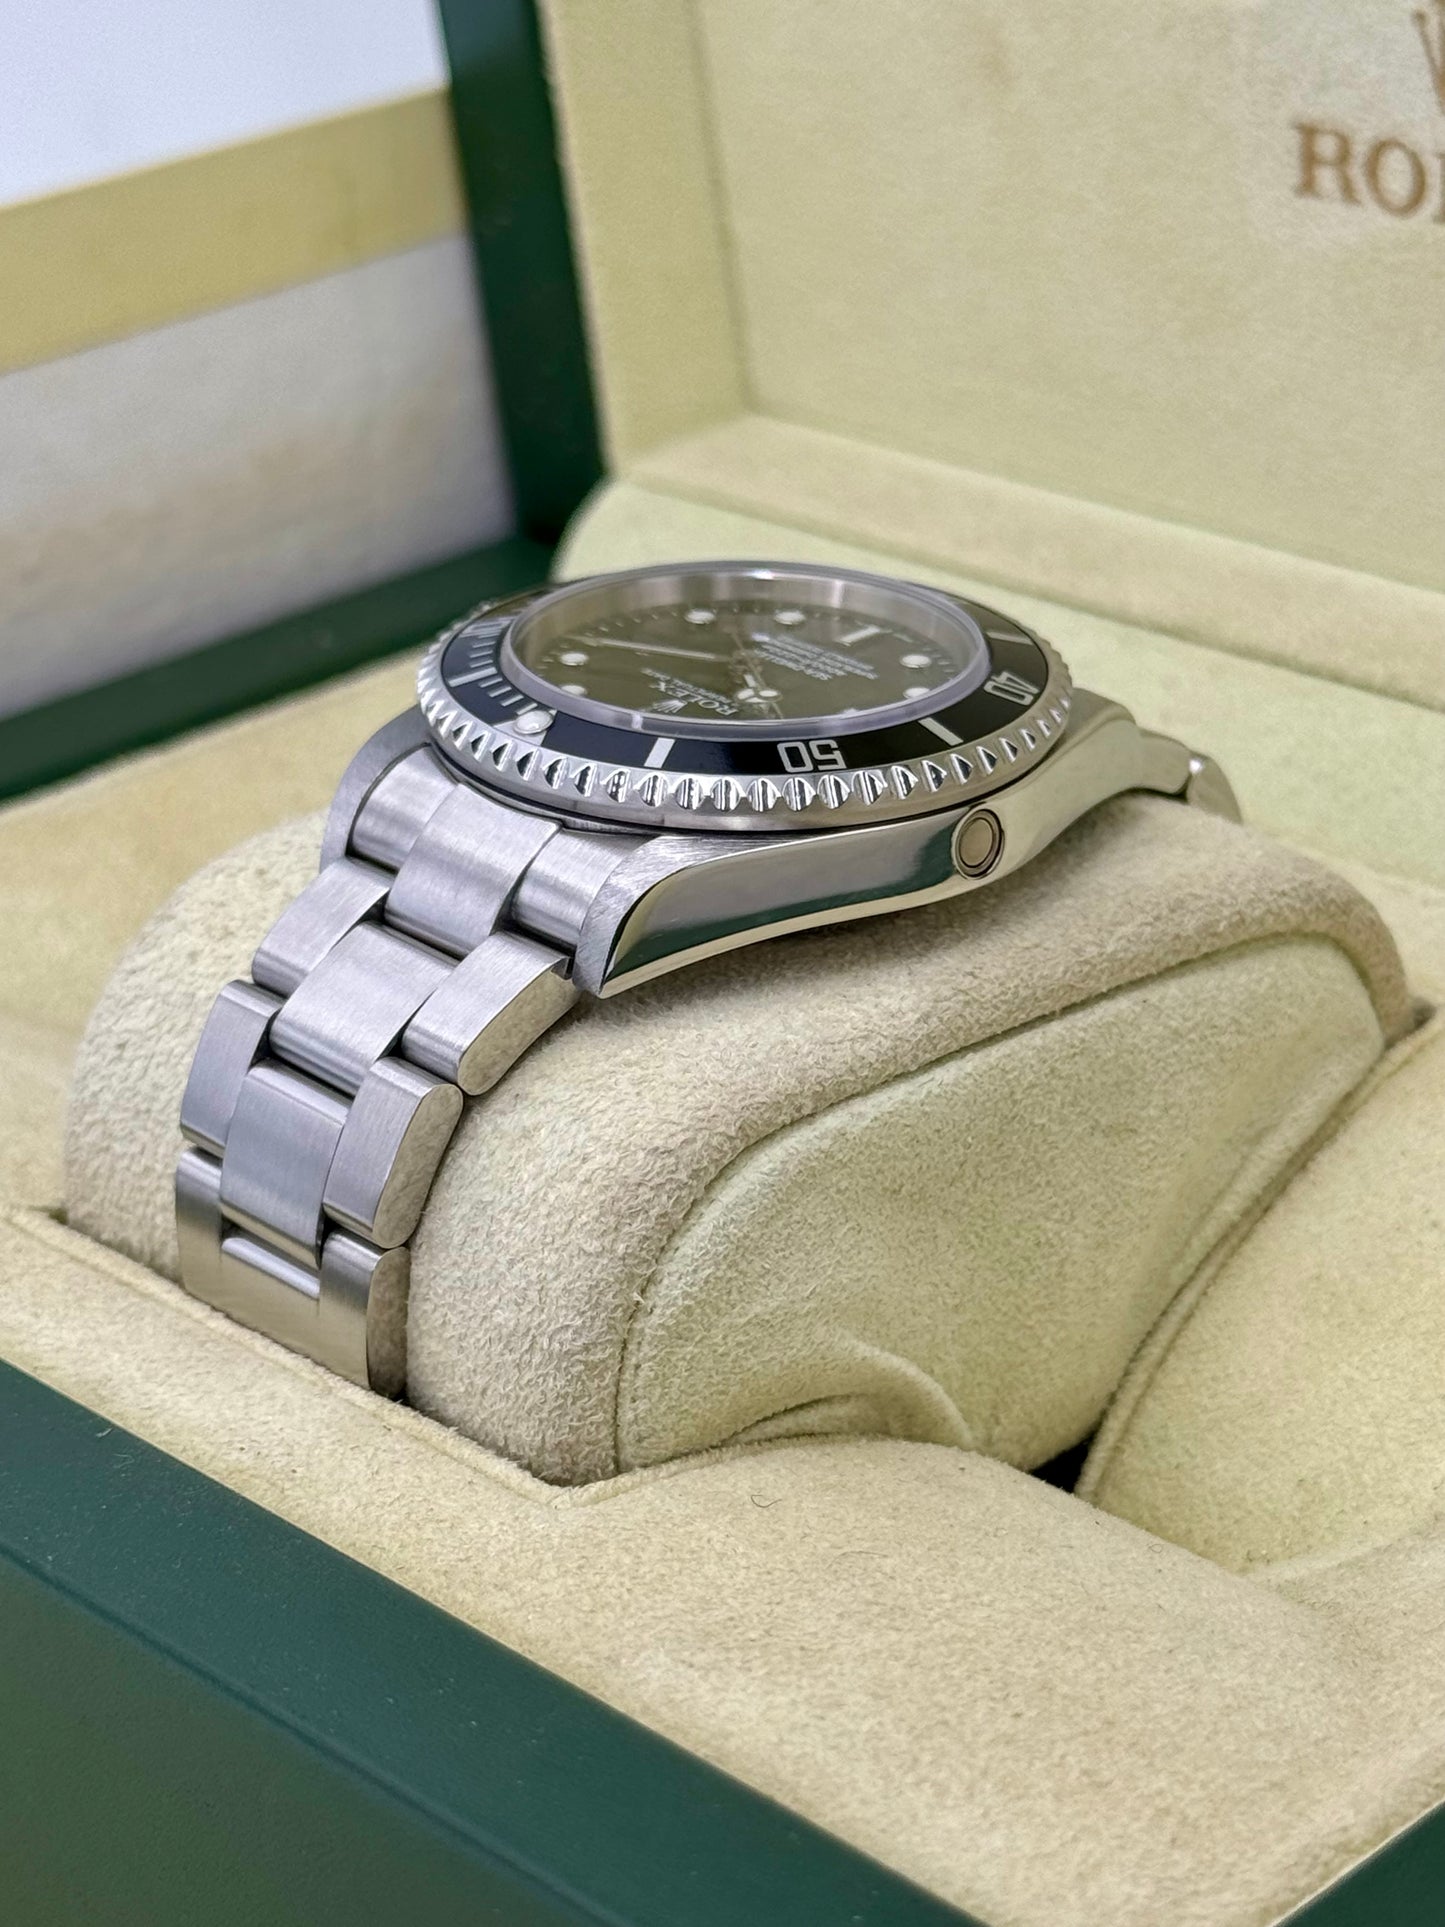 2005 Rolex Sea-Dweller 40mm 16600 Stainless Steel Black Dial - MyWatchLLC